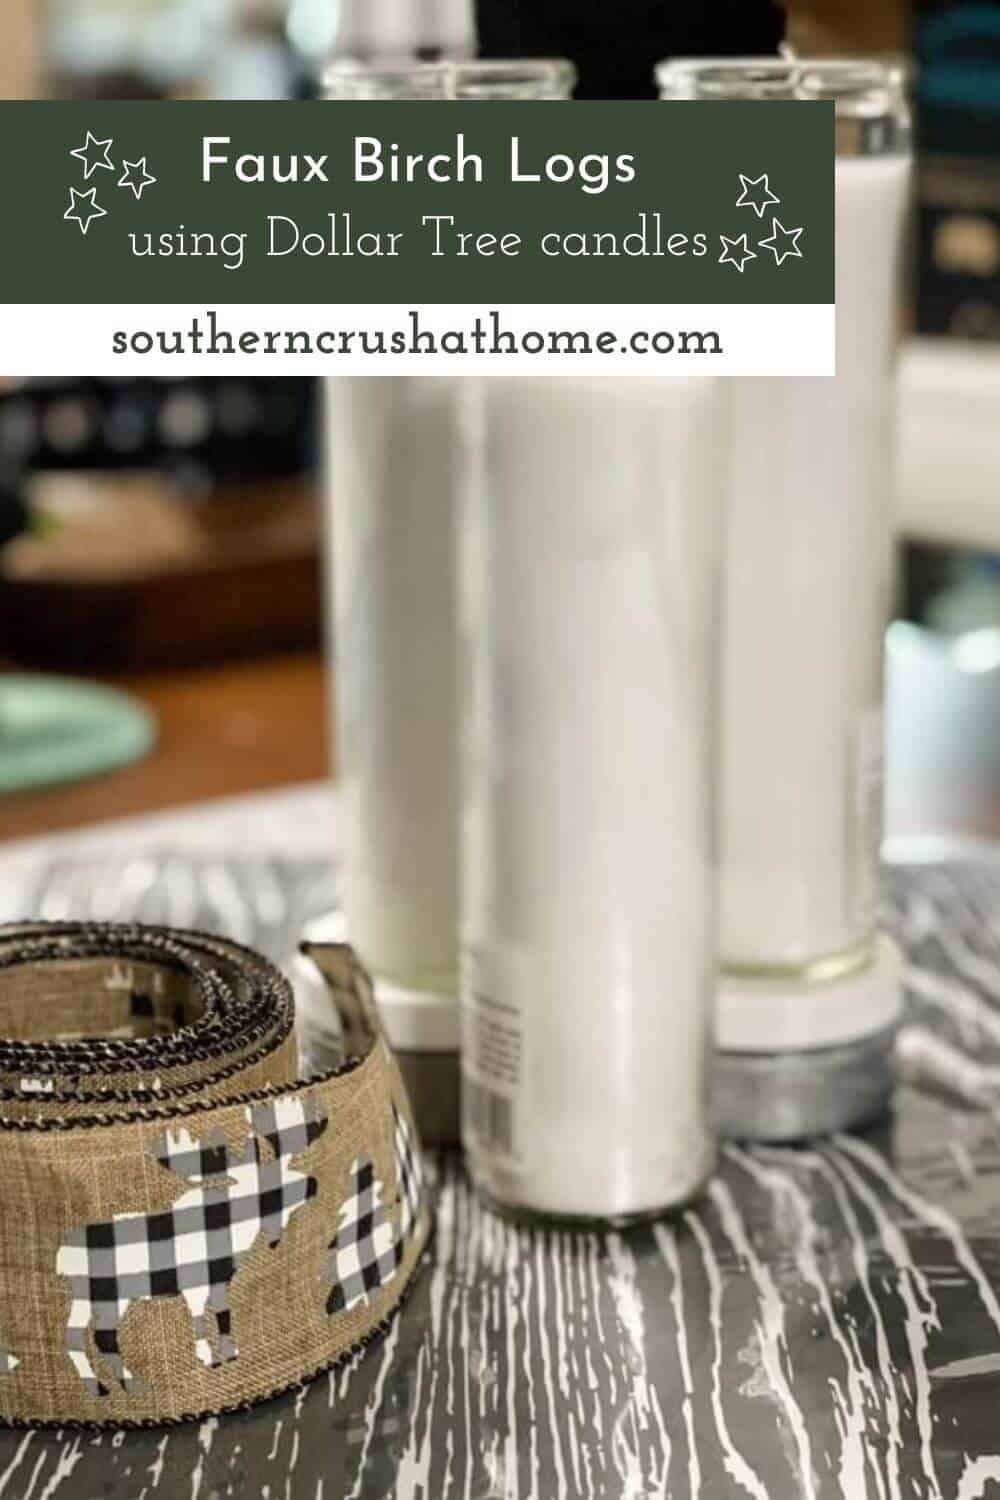 faux birch logs pin image with text